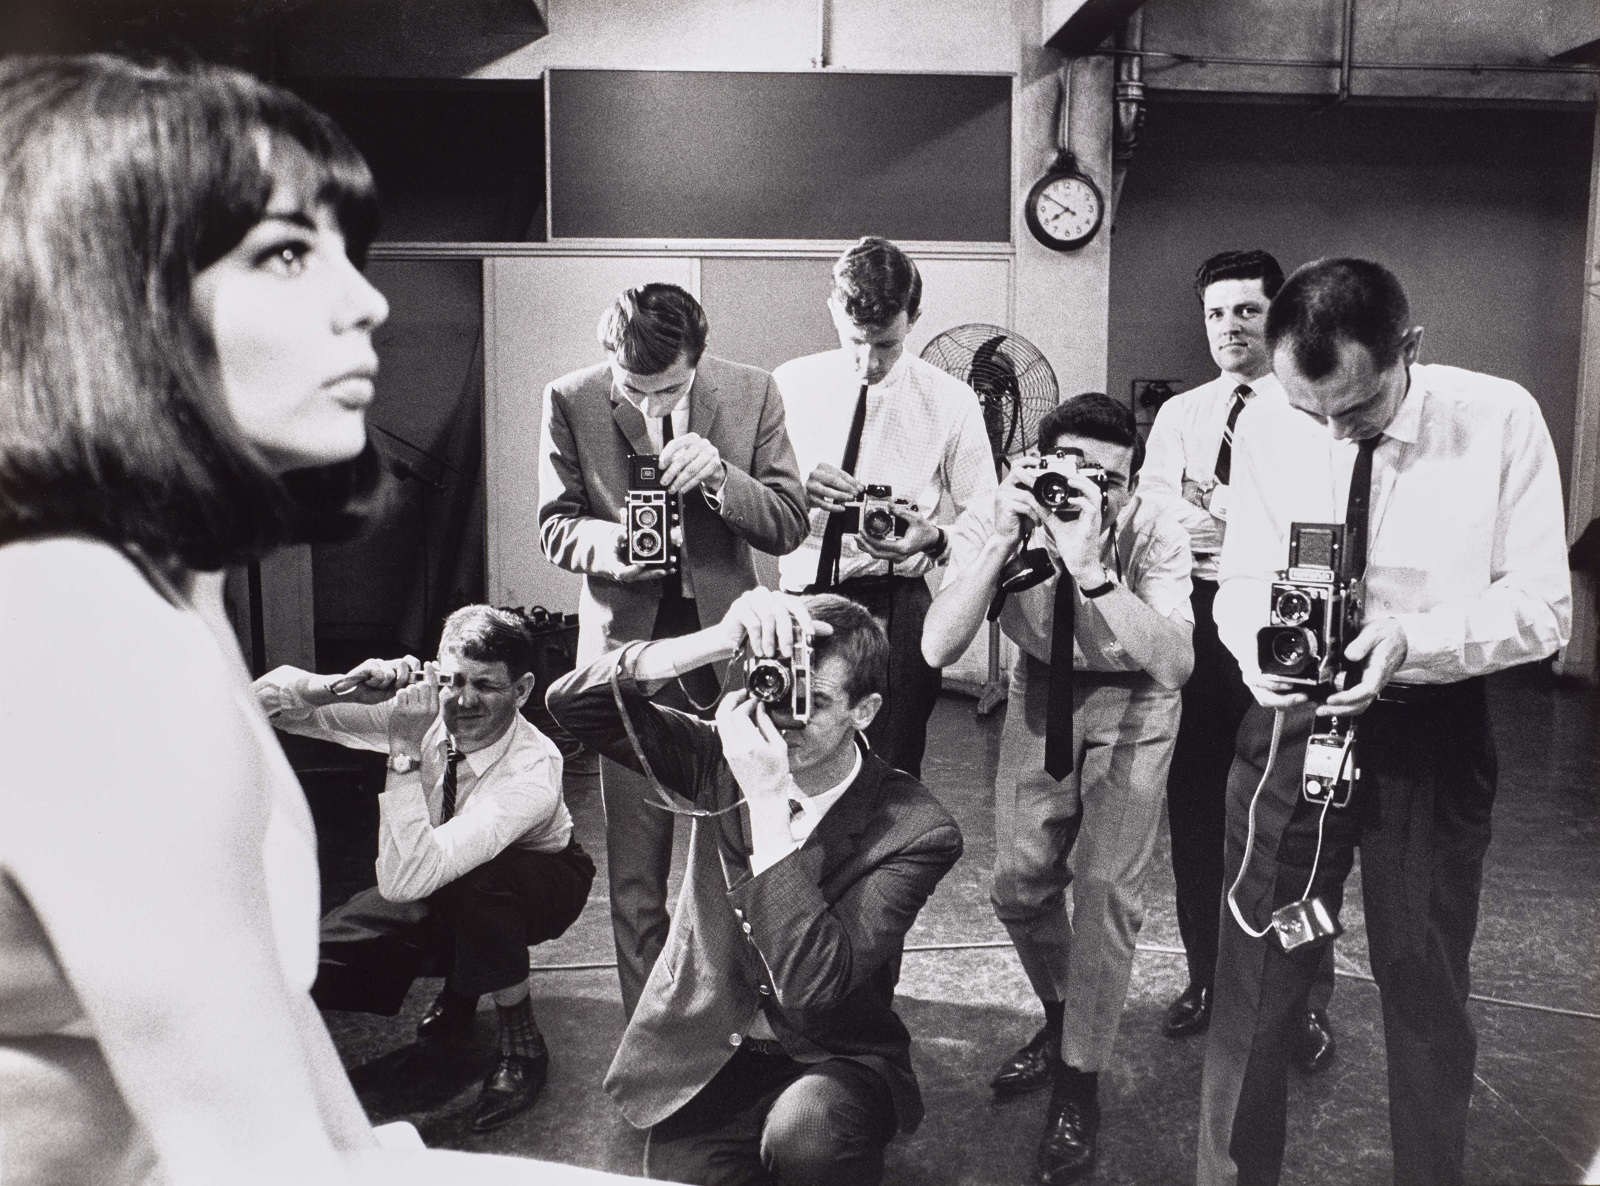 Seven male photography cadets dressed in collared shirts and ties photograph a female model in 1967